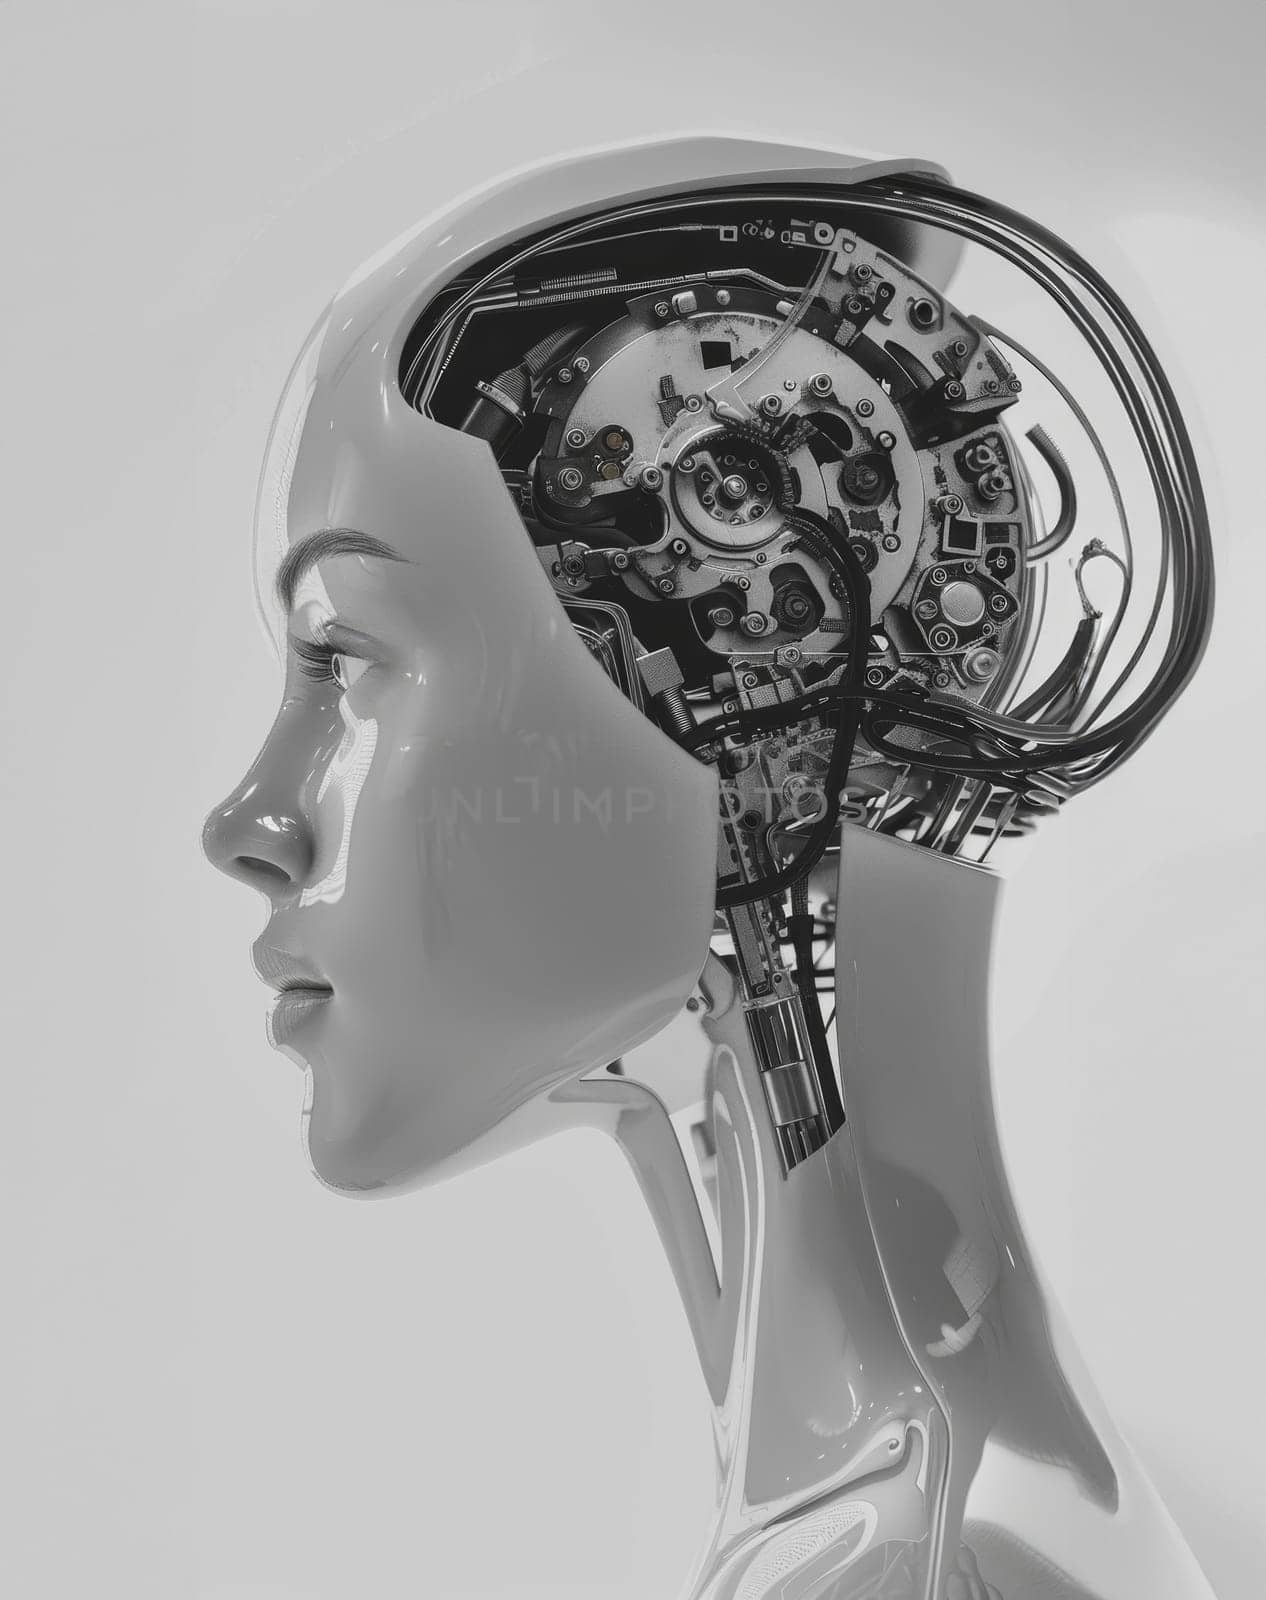 A close-up view of an intricately designed robotic head, revealing its complex mechanical components and sensors, conveying a sense of advanced technological innovation